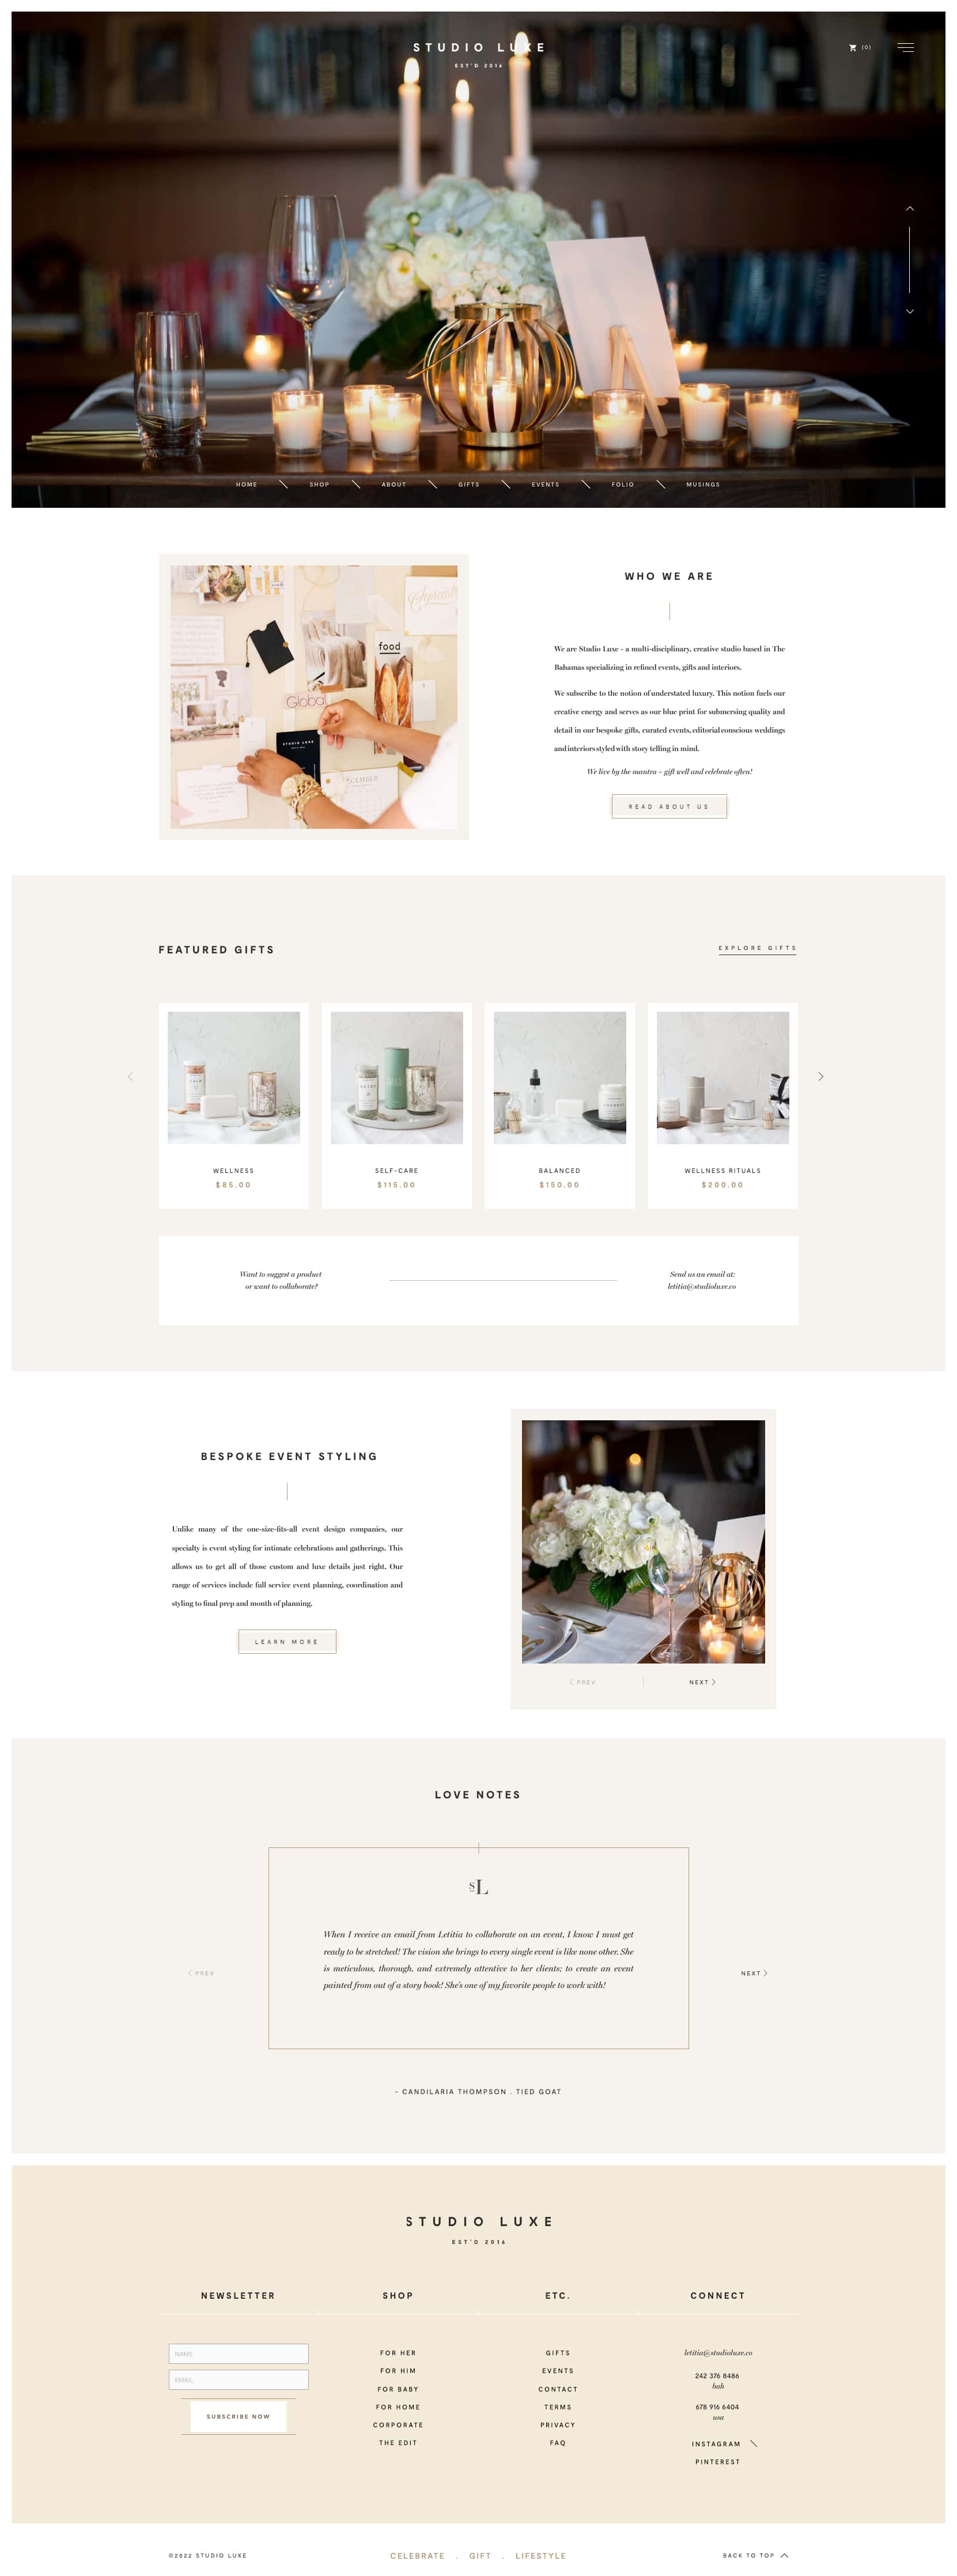 Squarespace Ecommerce Examples 5: Studio Luxe - Distinctive Elegance, Meticulous Organization, and User-Friendly Navigation